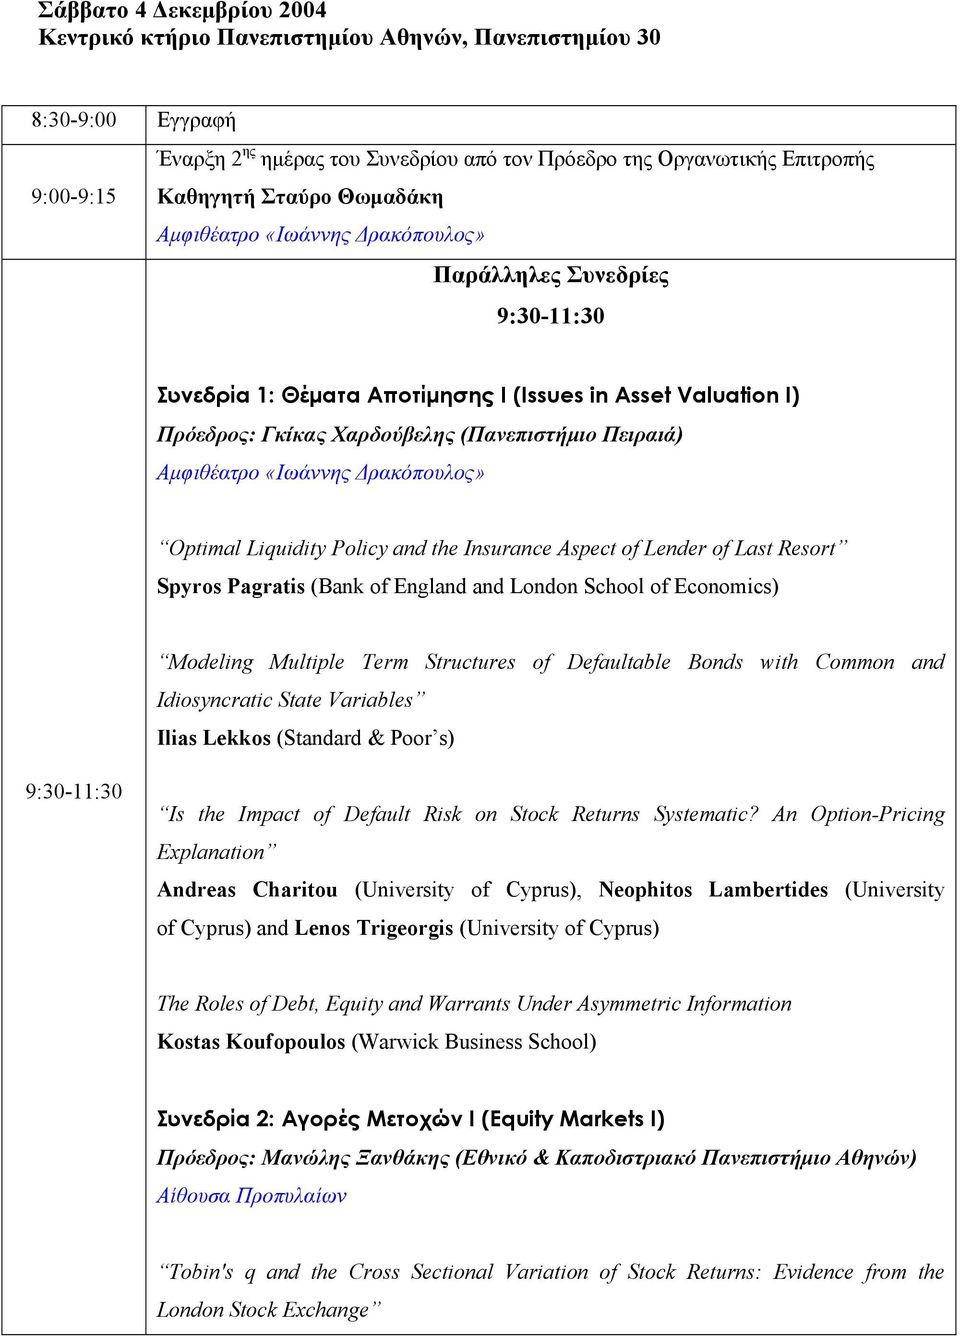 Aspect of Lender of Last Resort Spyros Pagratis (Bank of England and London School of Economics) Modeling Multiple Term Structures of Defaultable Bonds with Common and Idiosyncratic State Variables